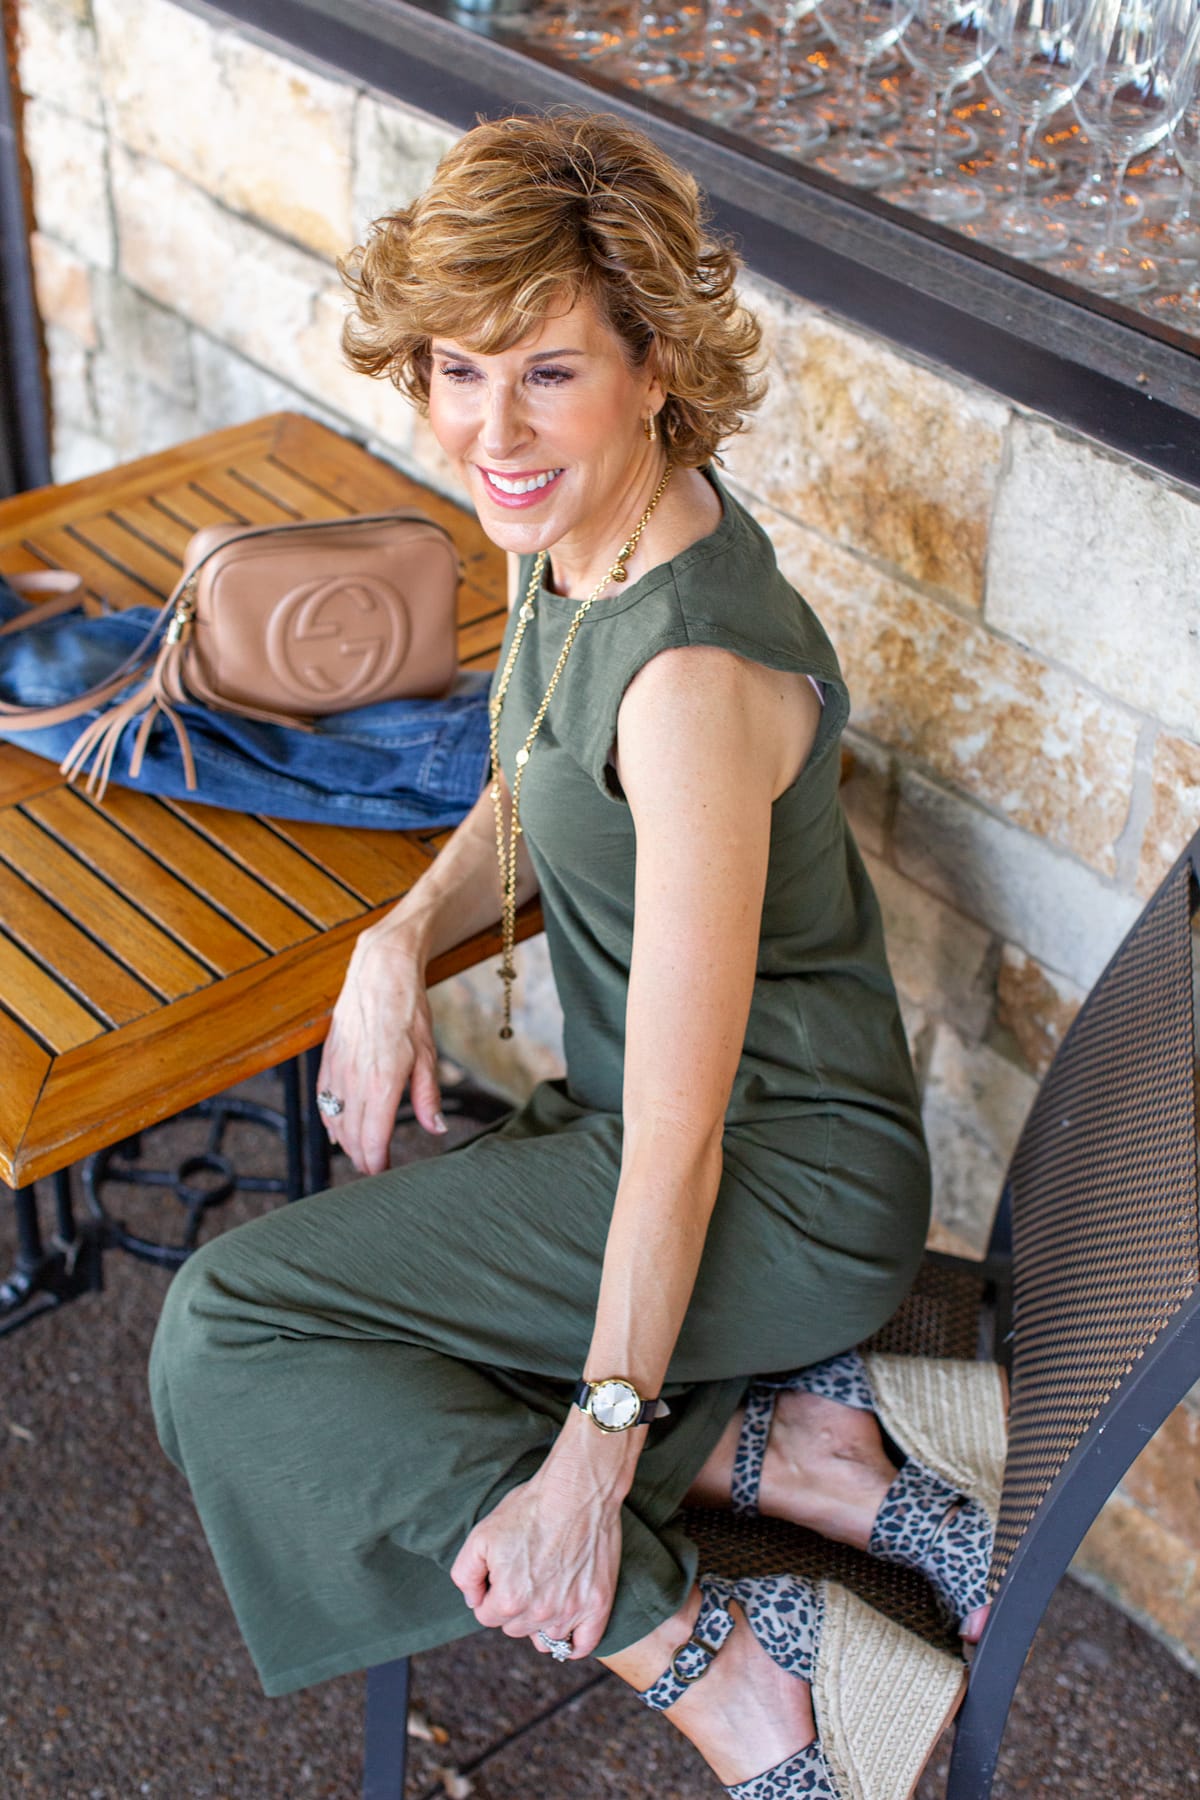 Woman in green dress sitting in a chair and looking off to one side